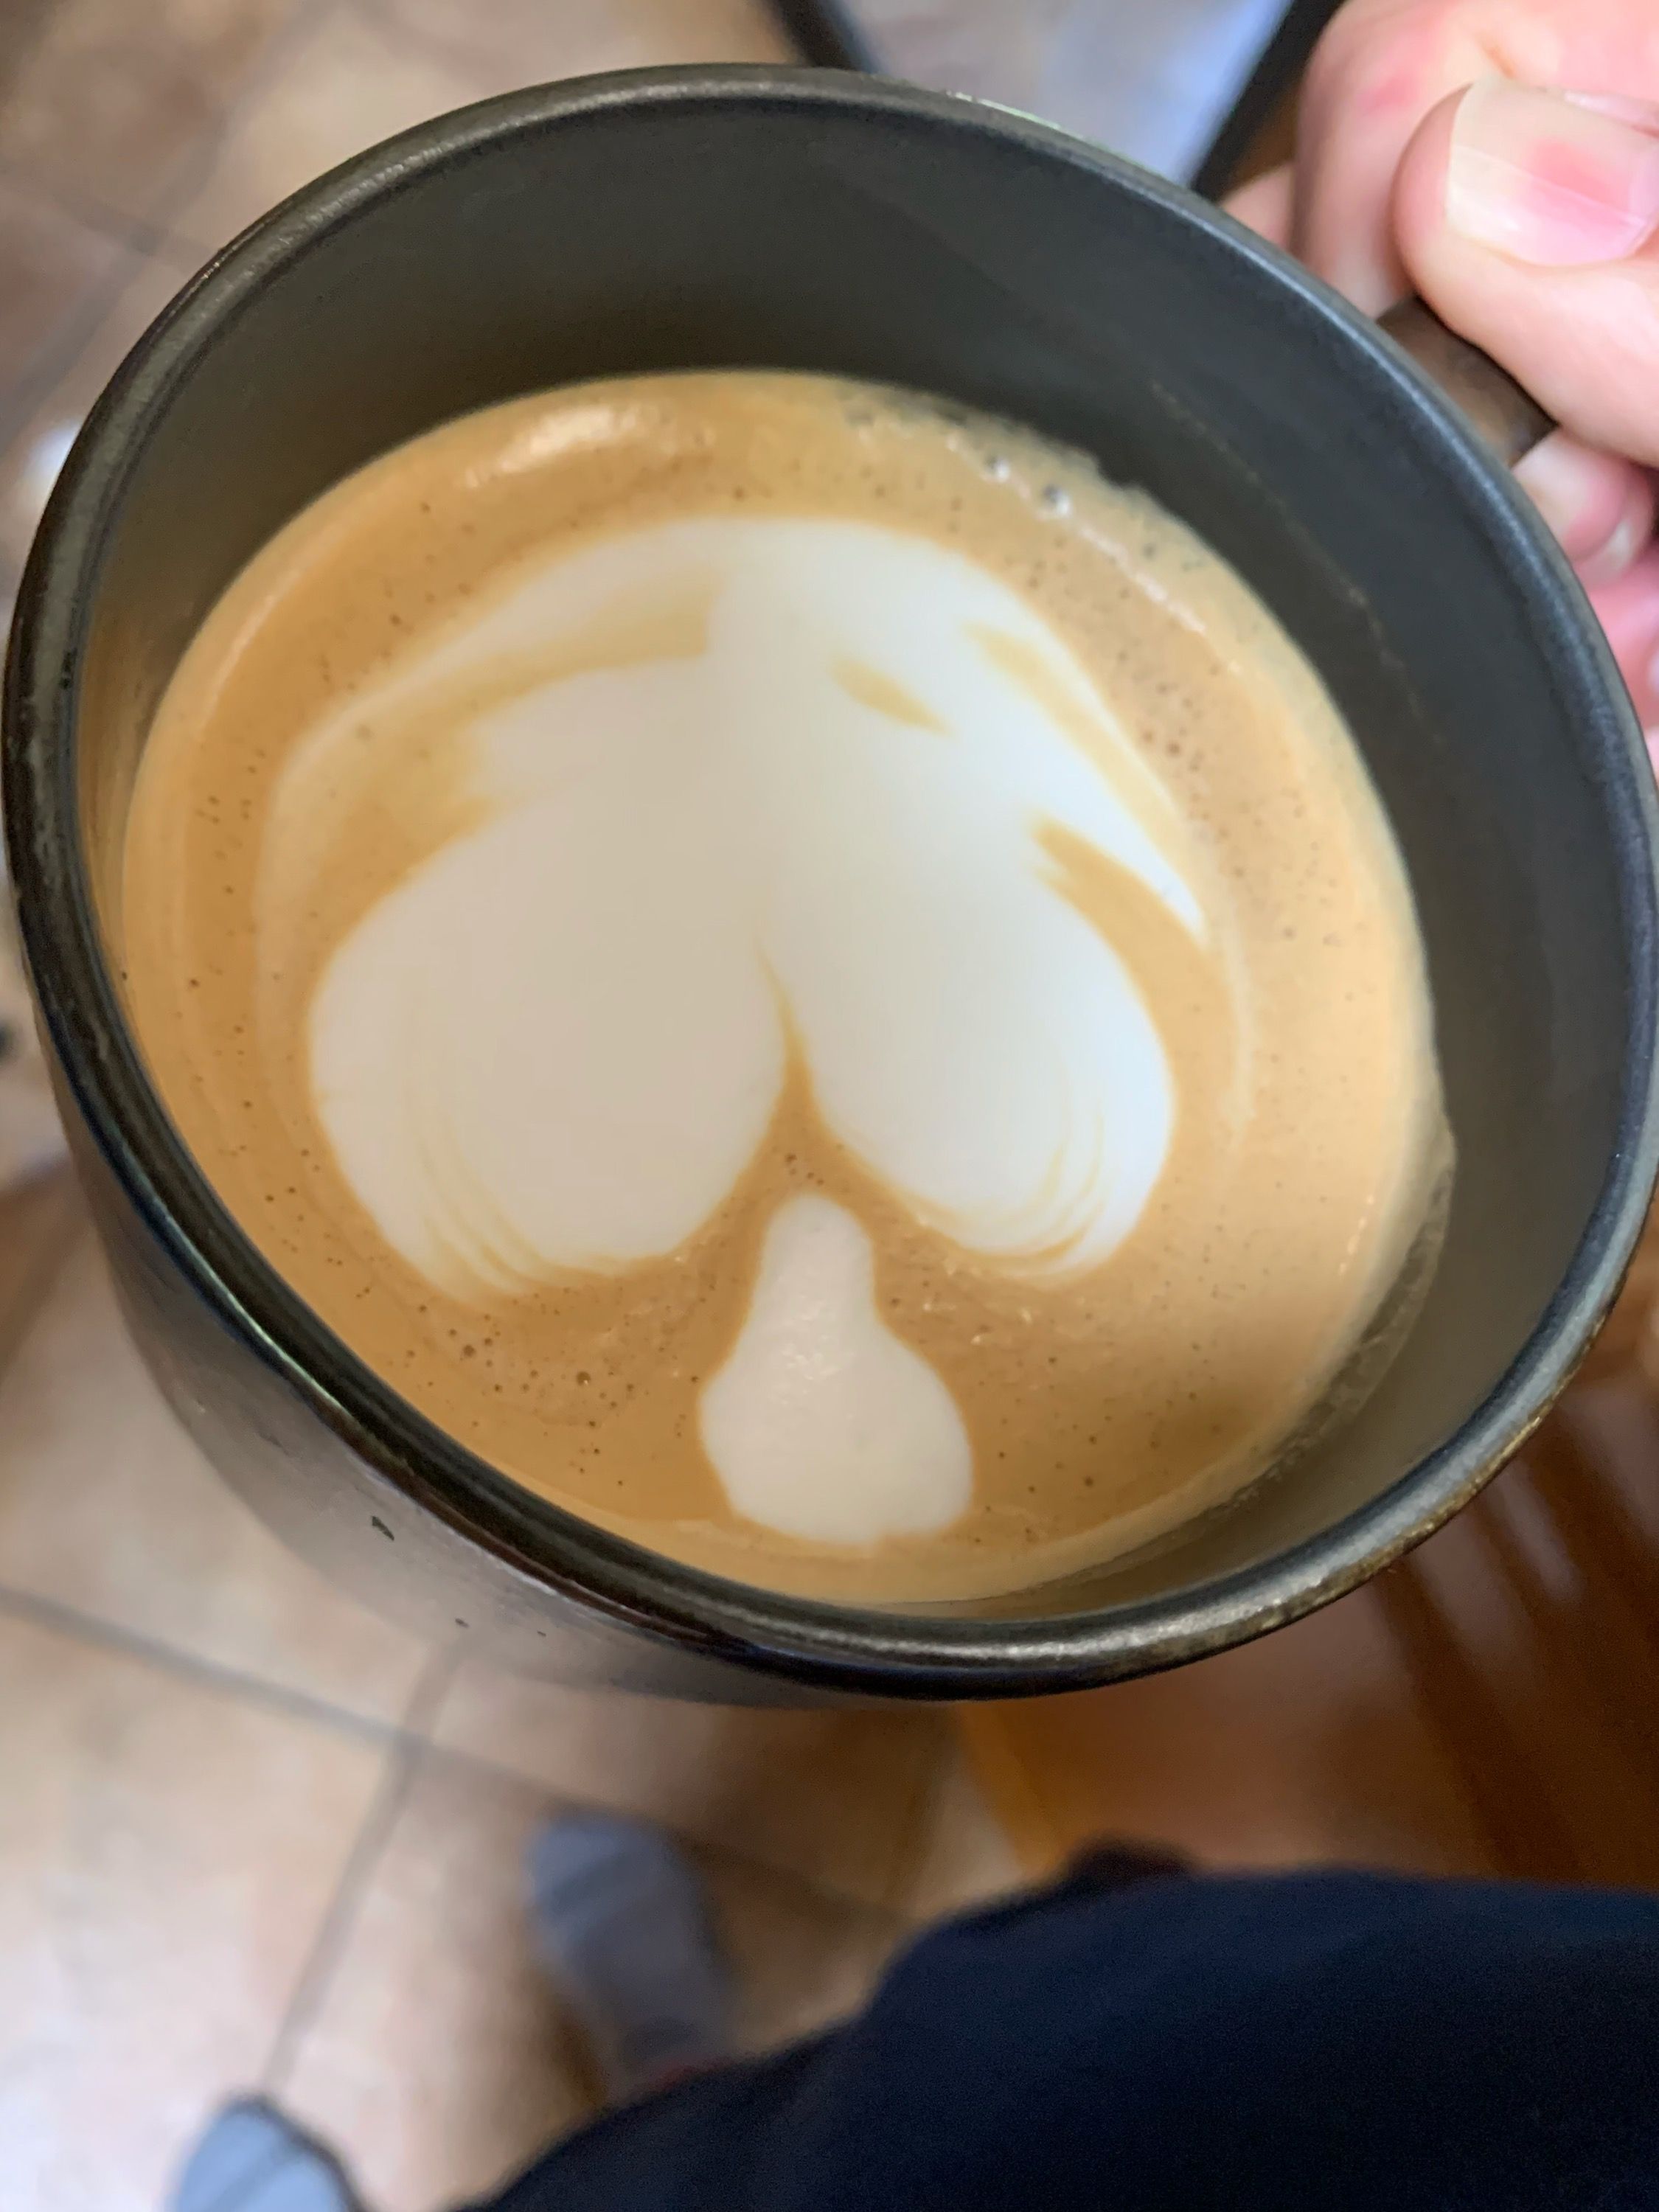 So my uncle made my aunt a cup of coffee today...